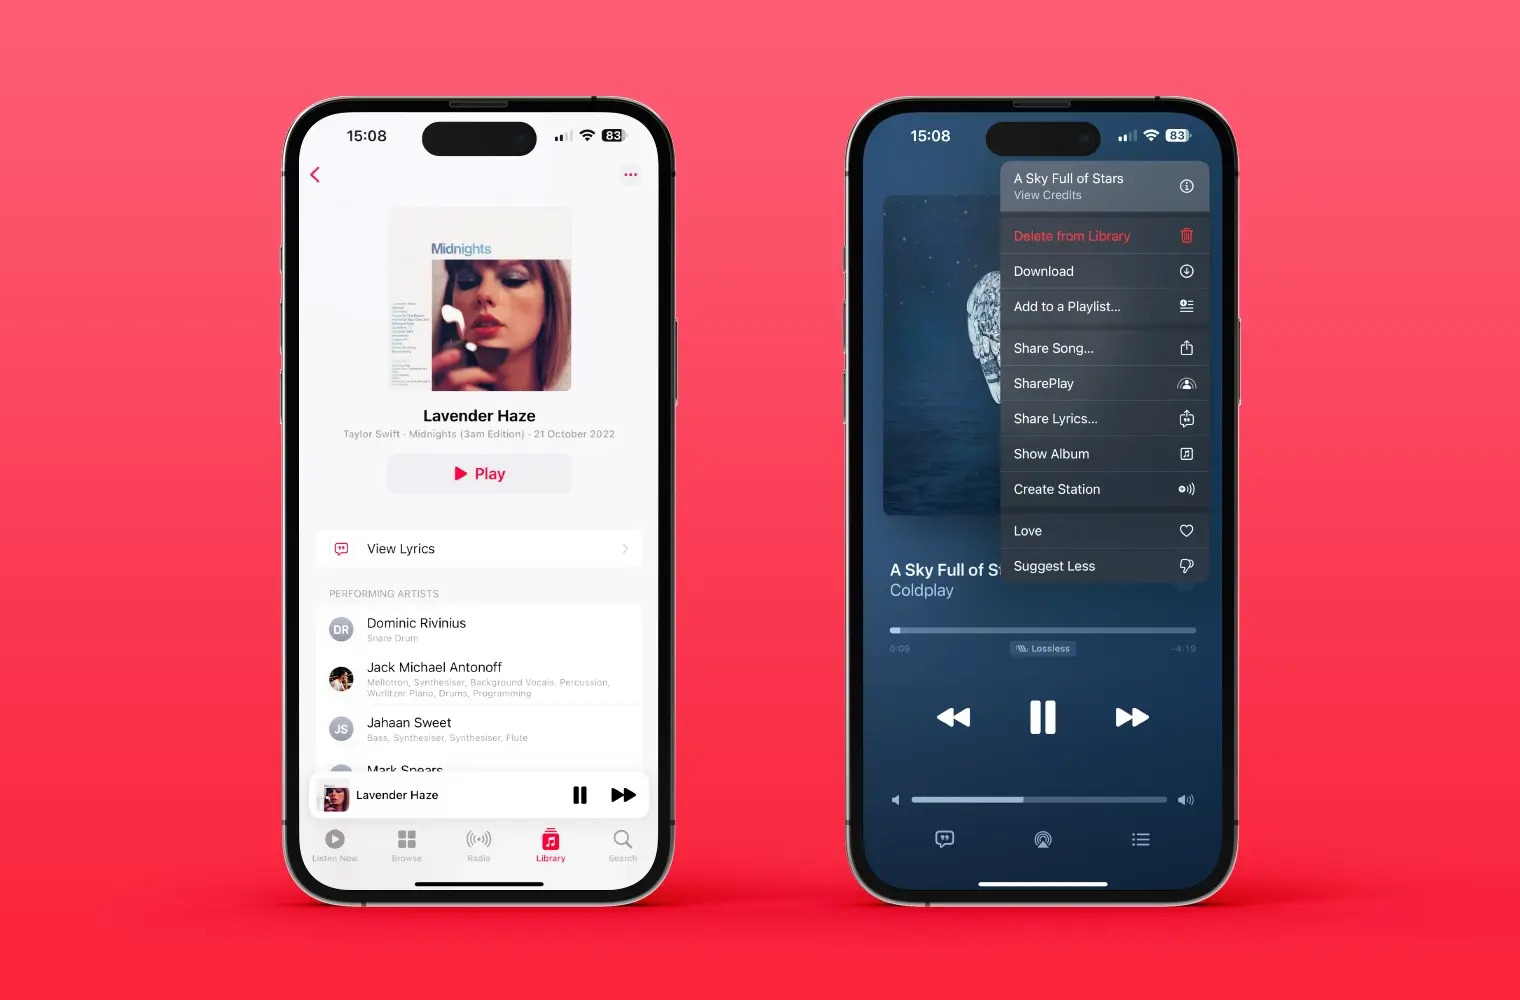 How to view credits on Apple Music